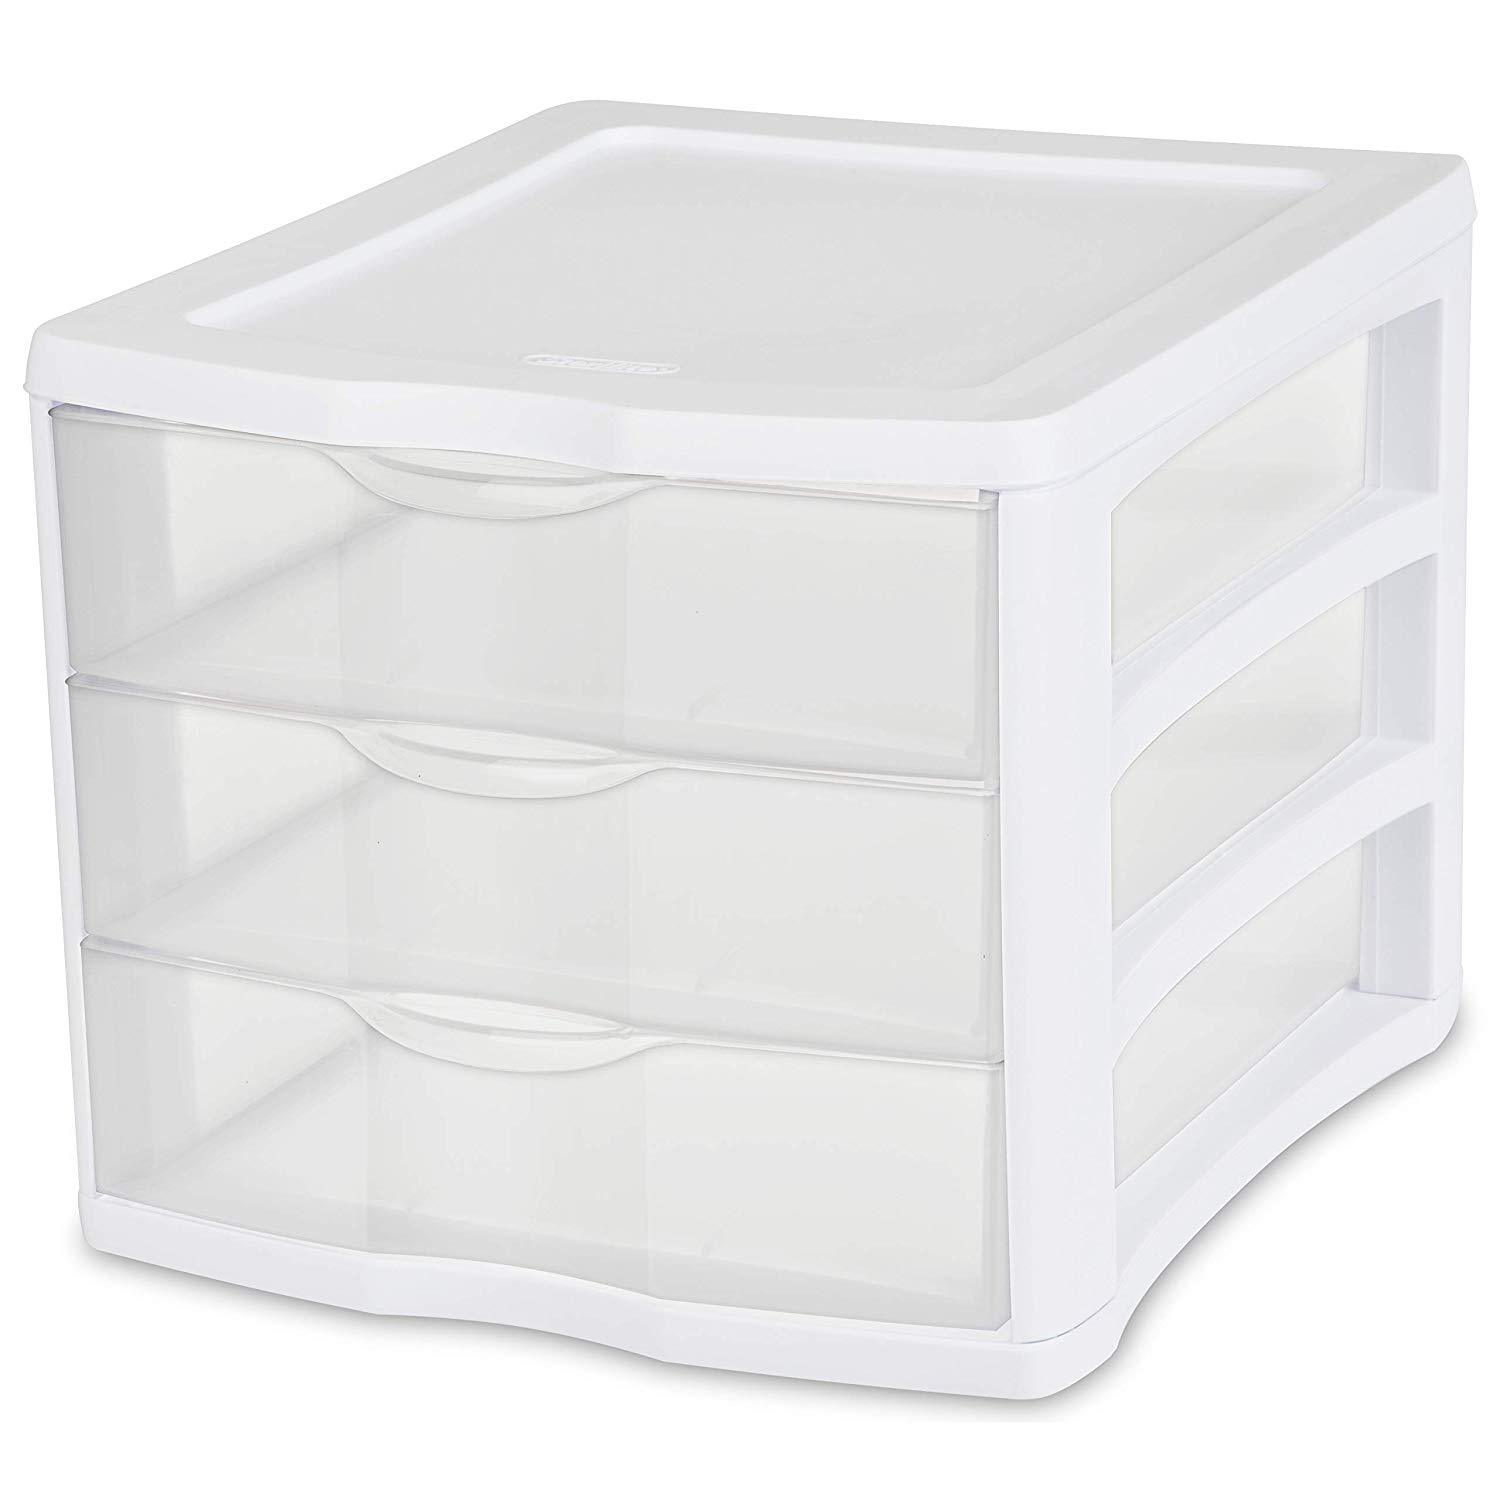 Sterilite 17918004 3 Drawer Unit White Frame With Clear Drawers